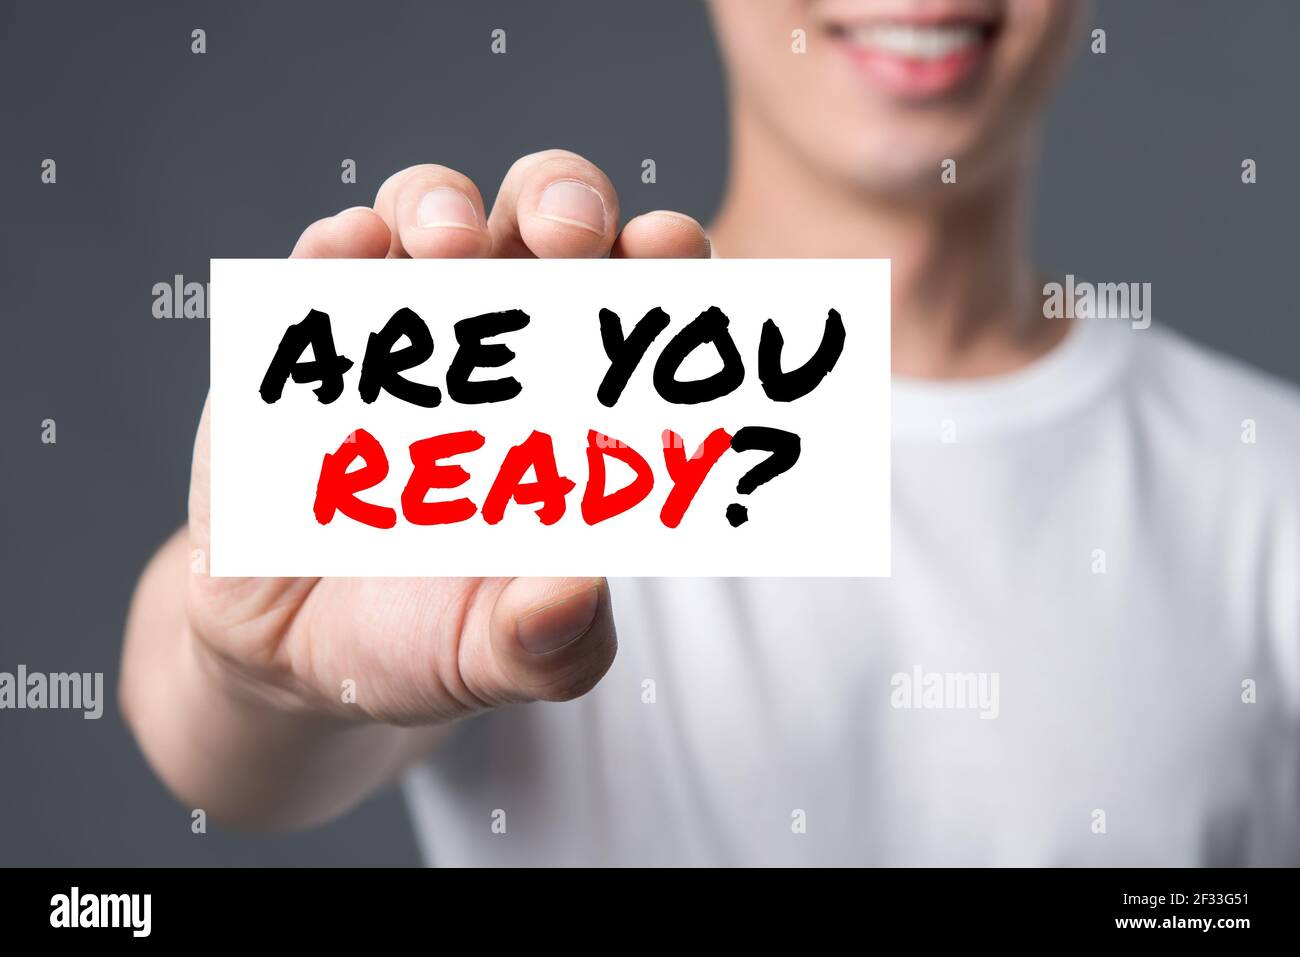 ARE YOU READY? message on the card shown by a man Stock Photo